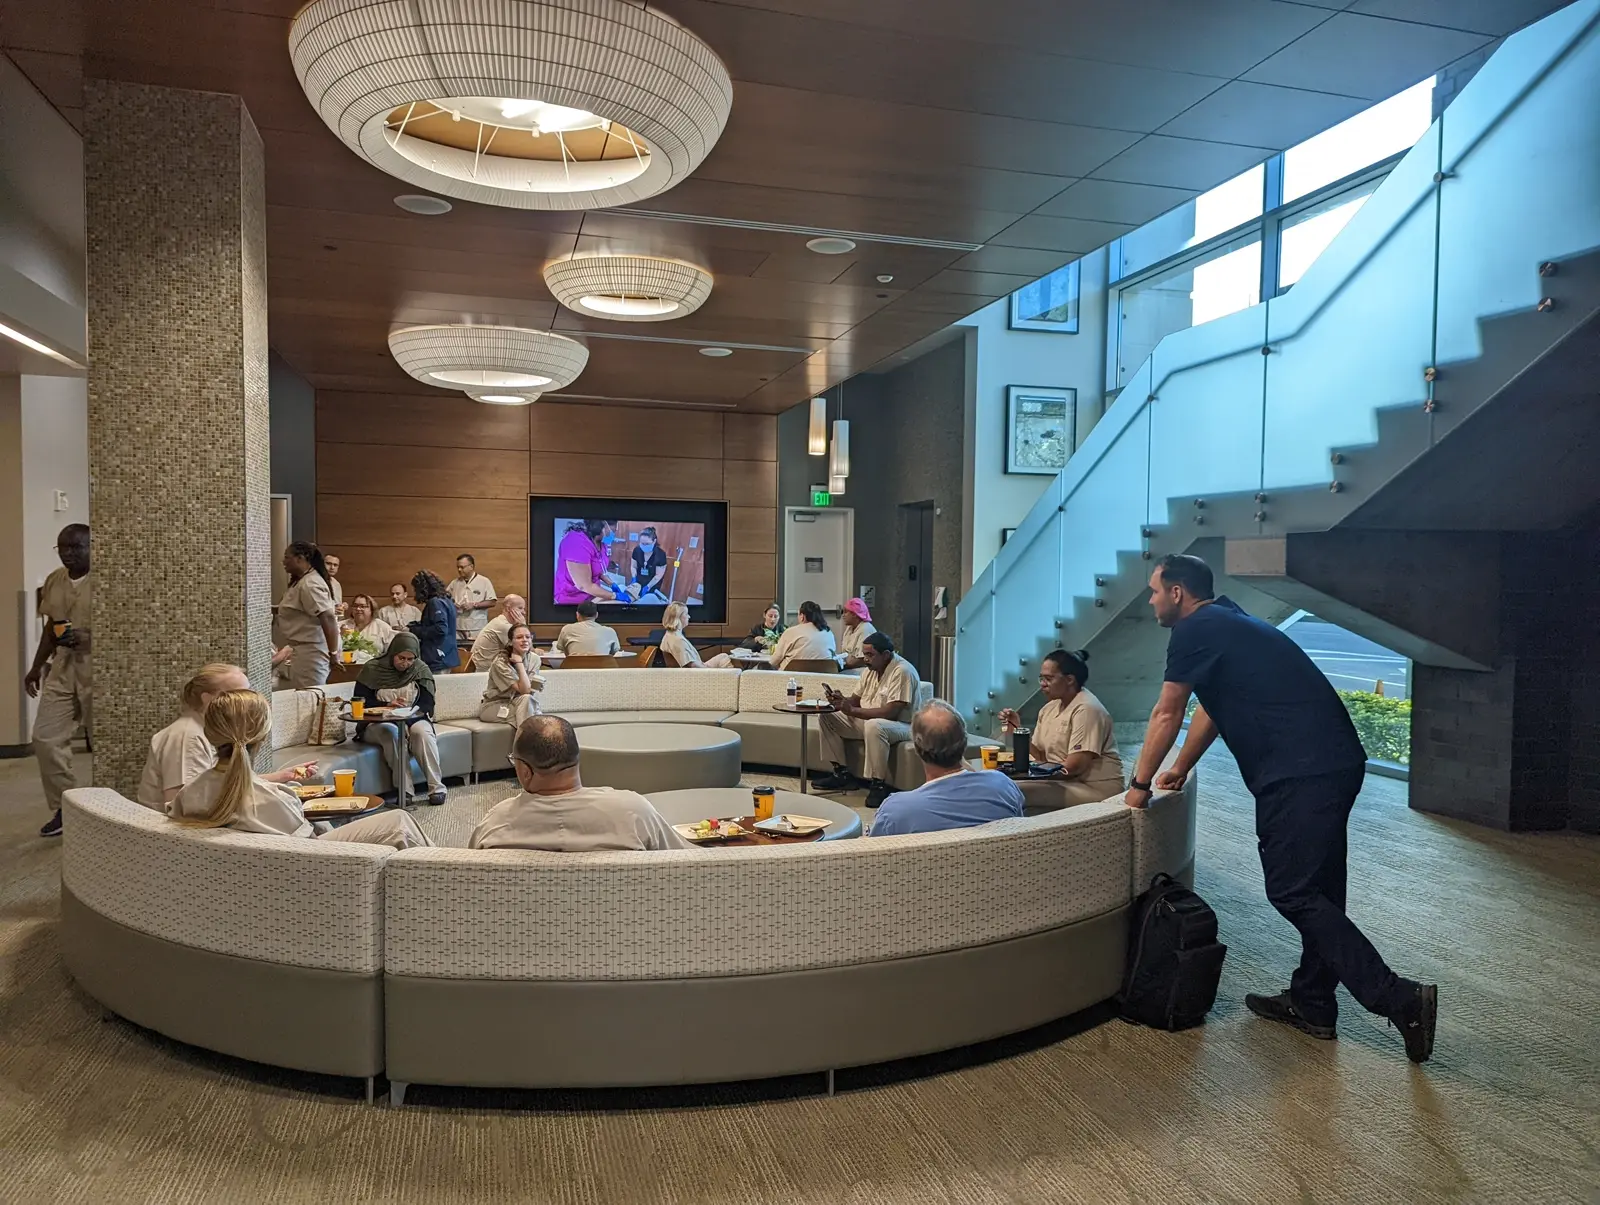 CAMLS A group of people in white uniforms sits and stands around a curved, modern sofa, watching a large TV screen in a spacious, well-lit lounge area. A man in dark clothing stands by a staircase on the right. The room features contemporary decor and large, circular ceiling lights.